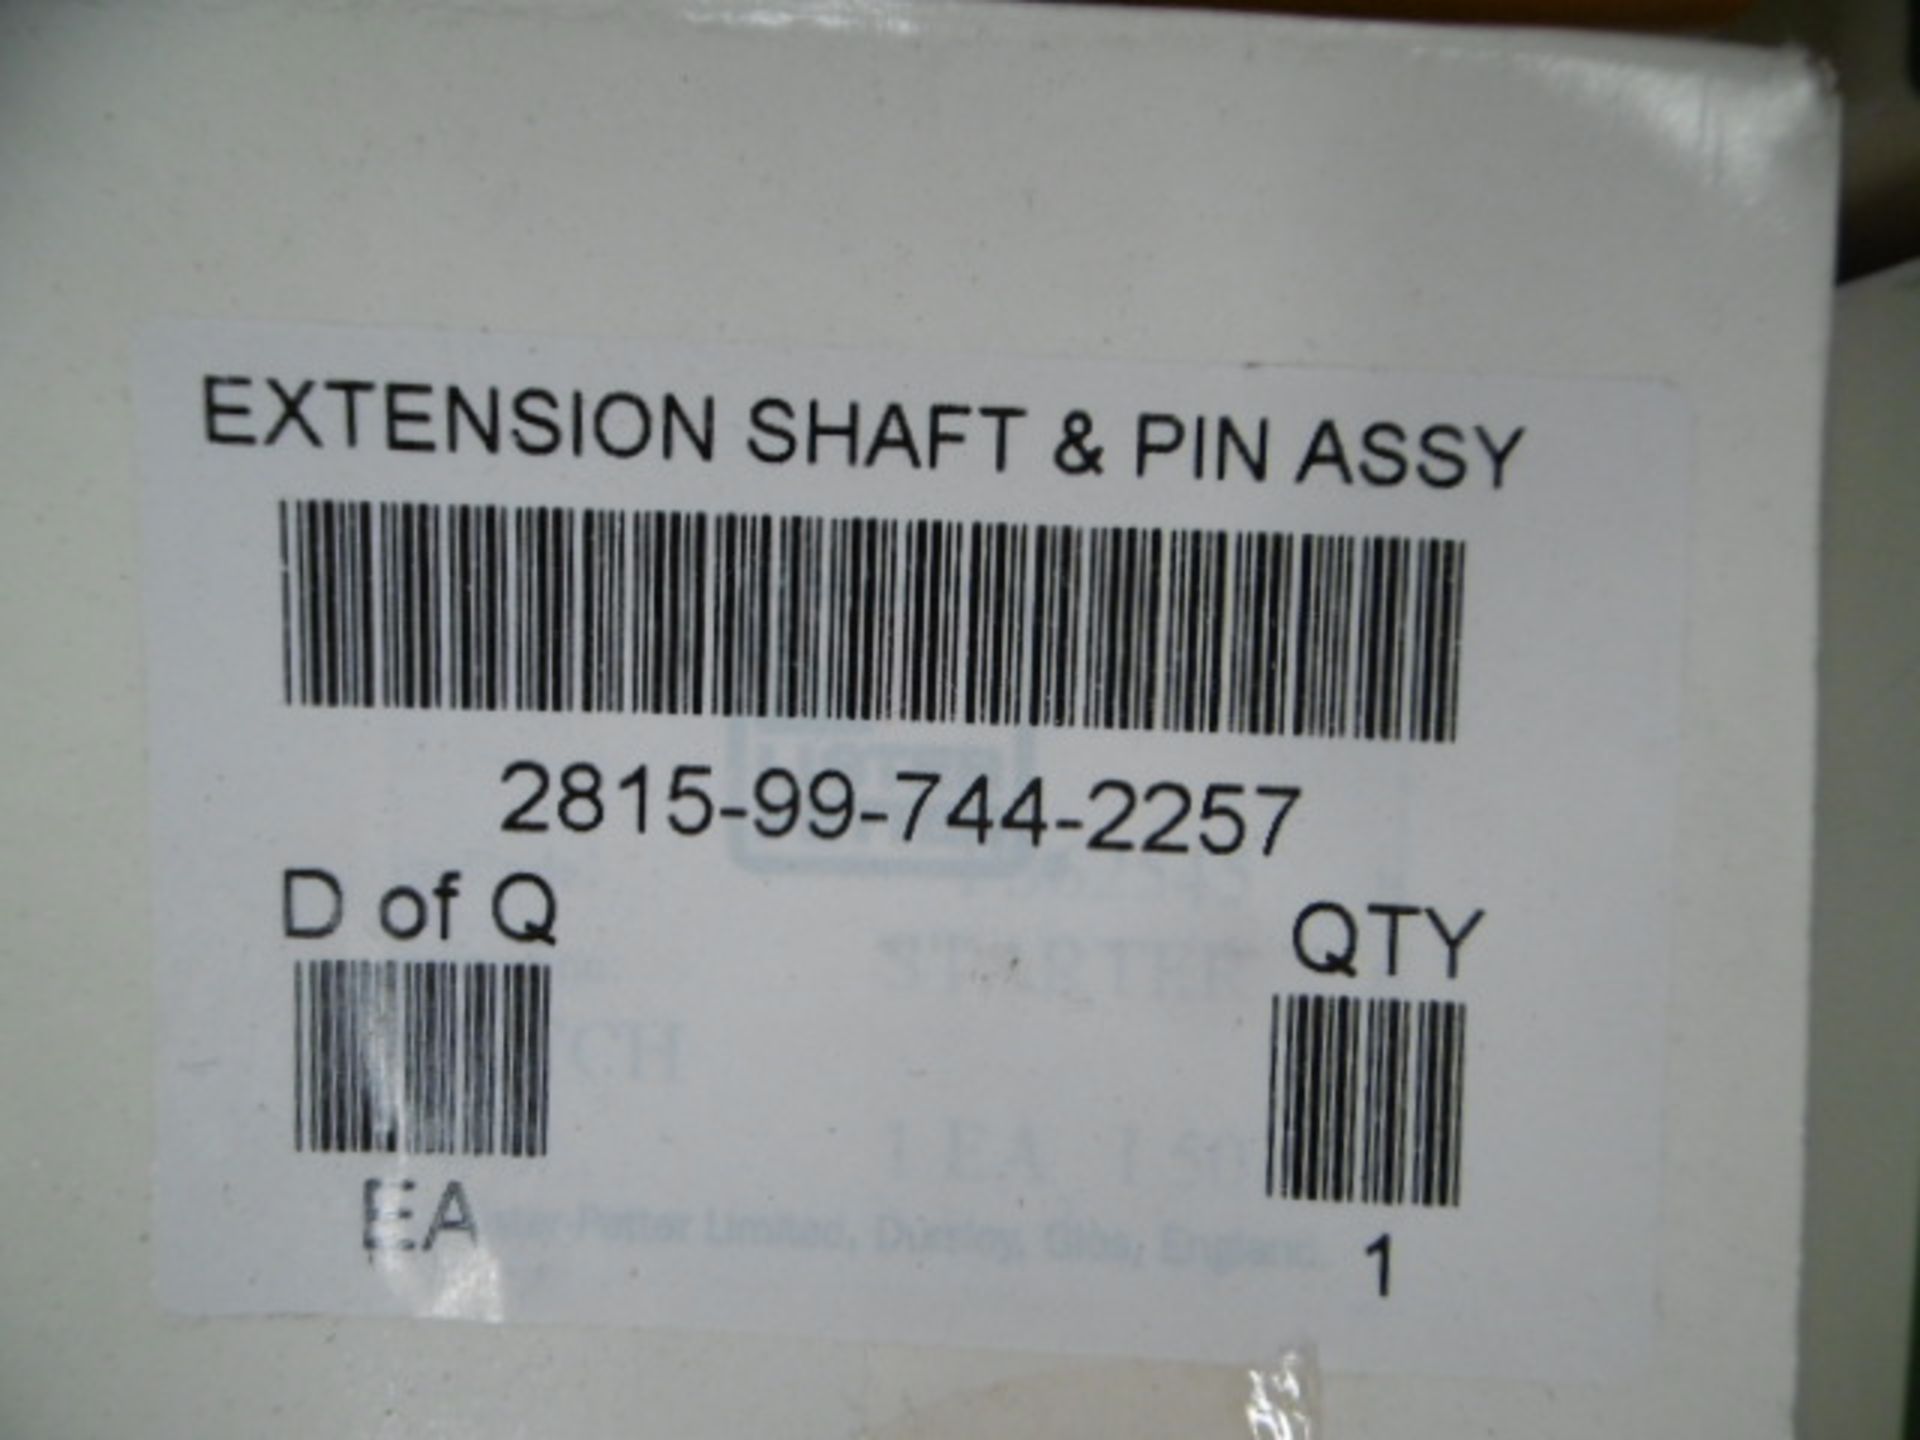 10 x Lister Petter Extension Shaft & Pin Assys - Image 4 of 4